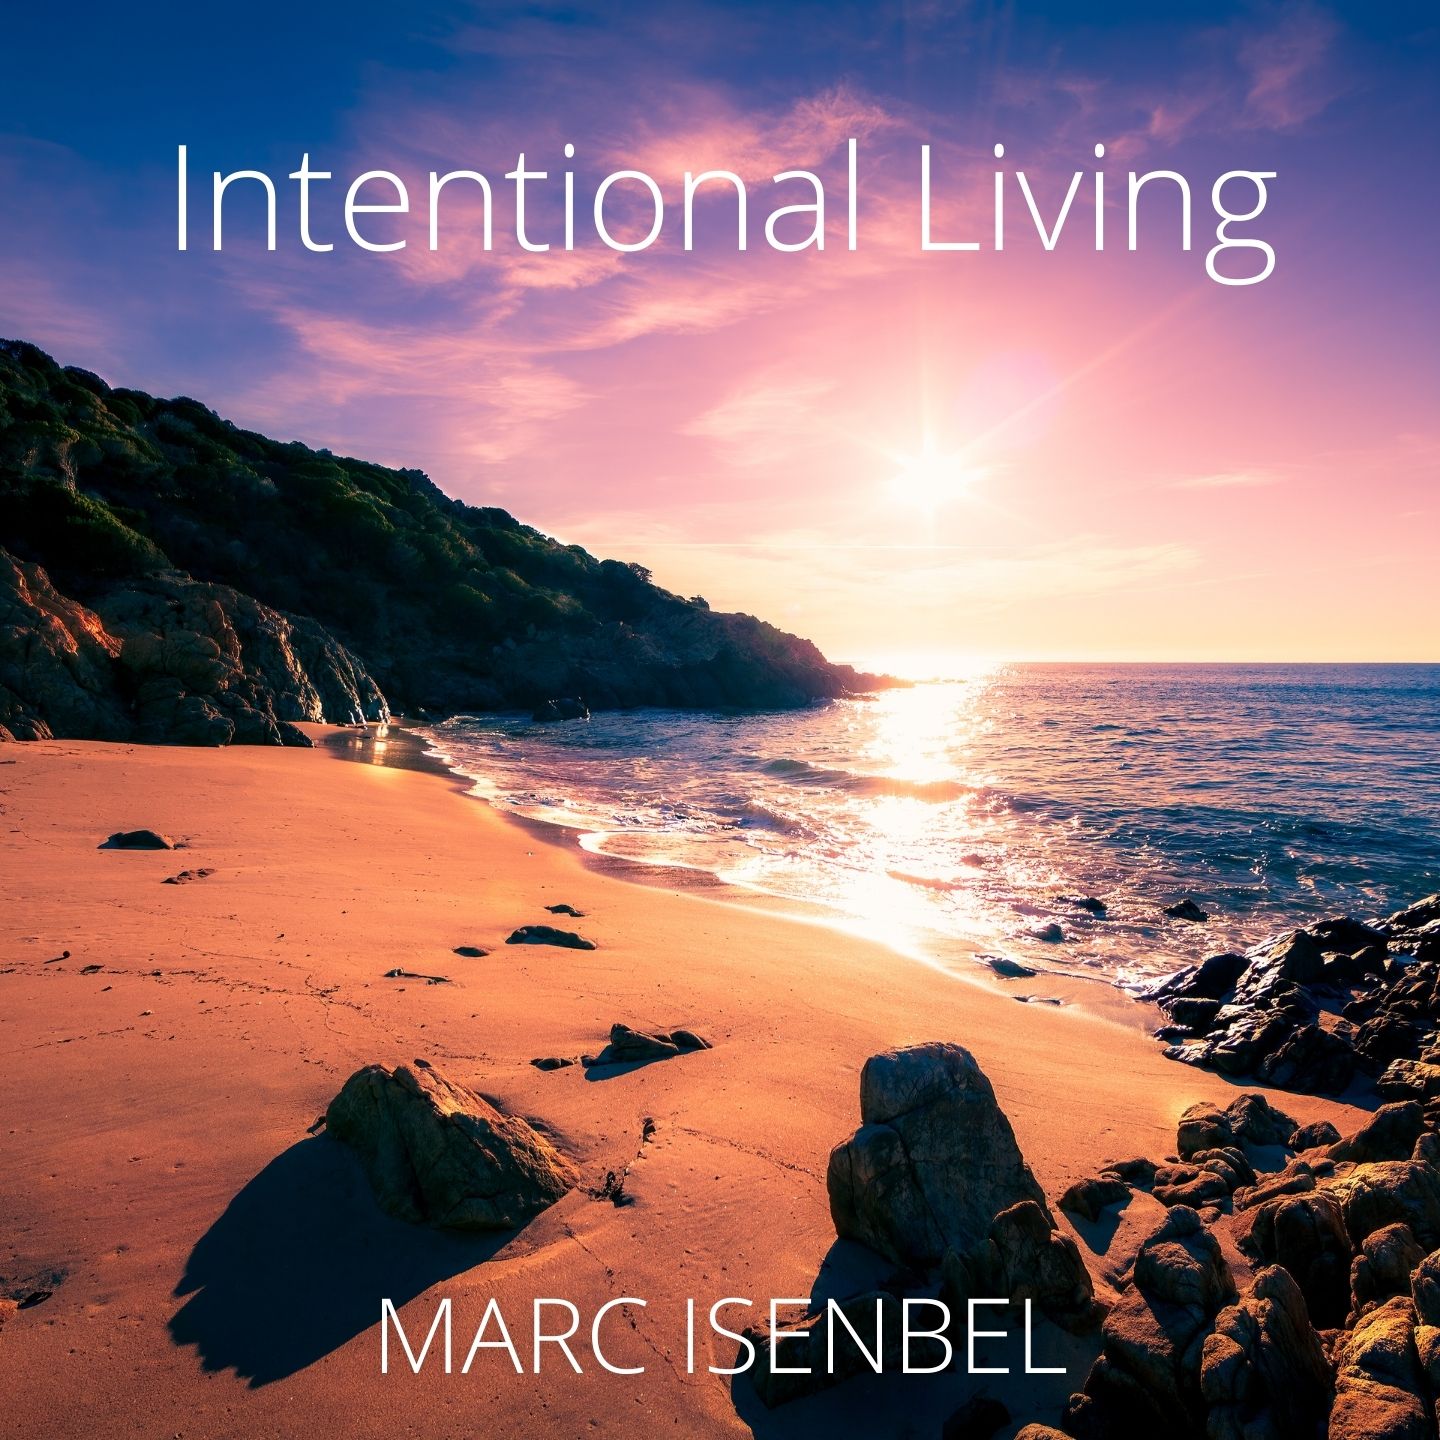 Intentional living